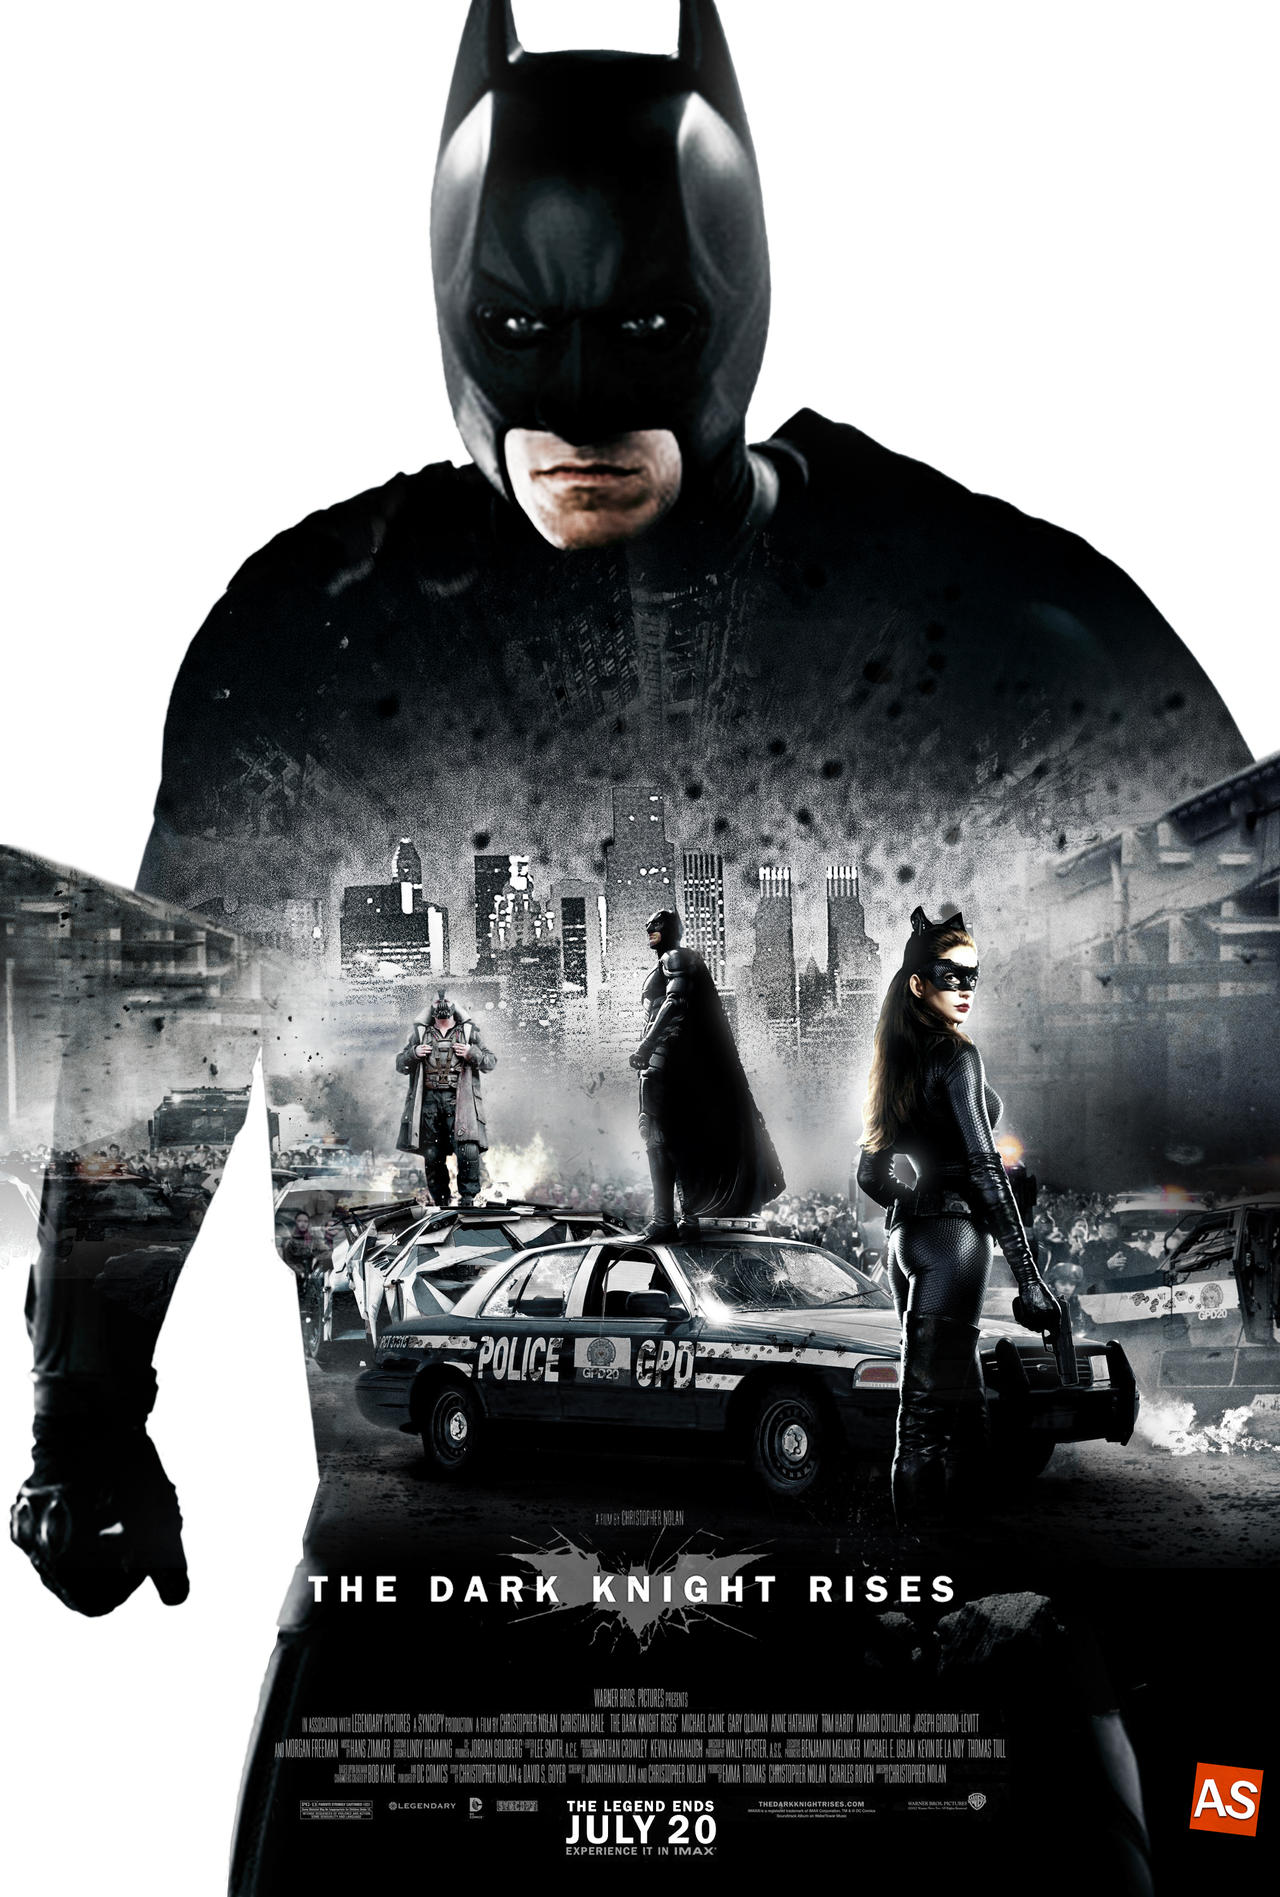 The Dark Knight Rises poster (Total Recall style)